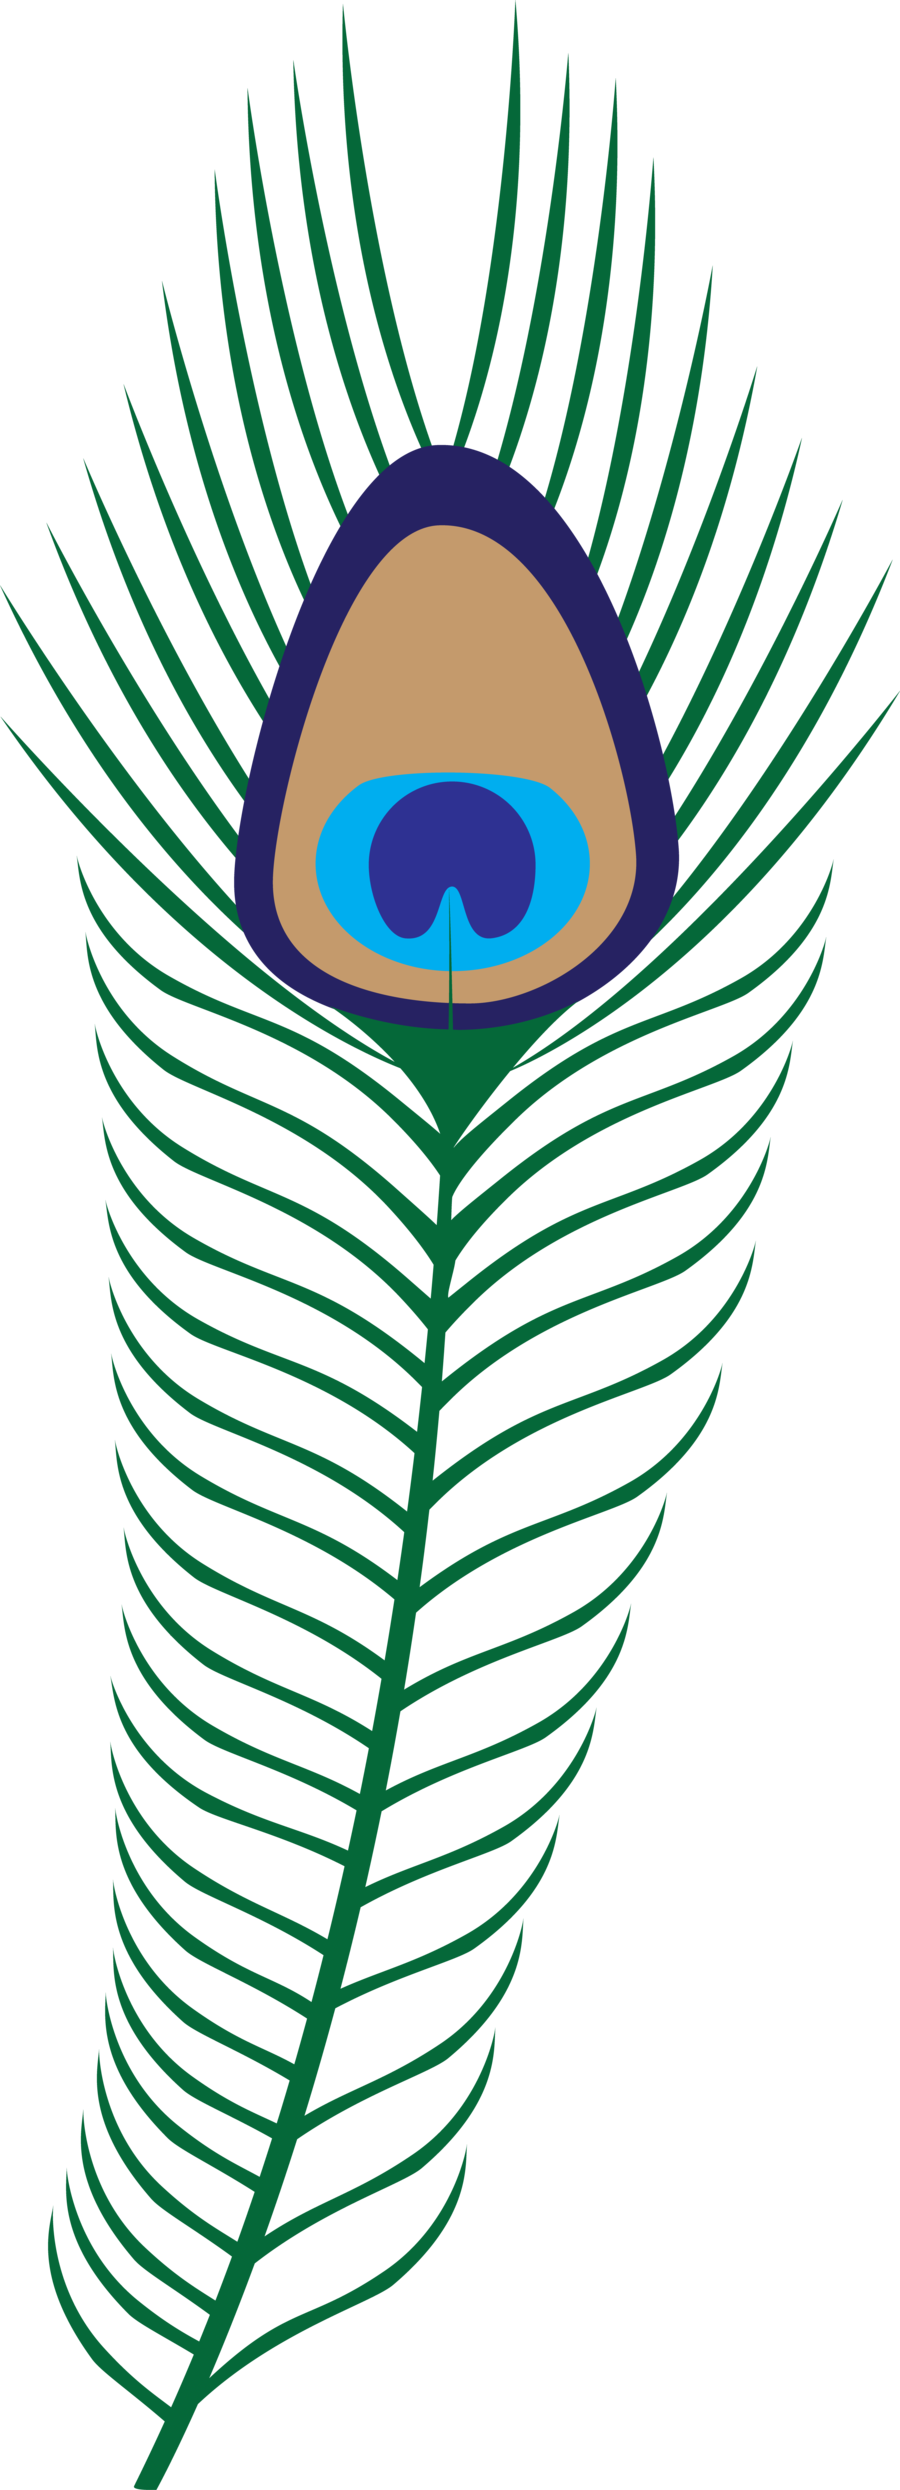 Feather peacock